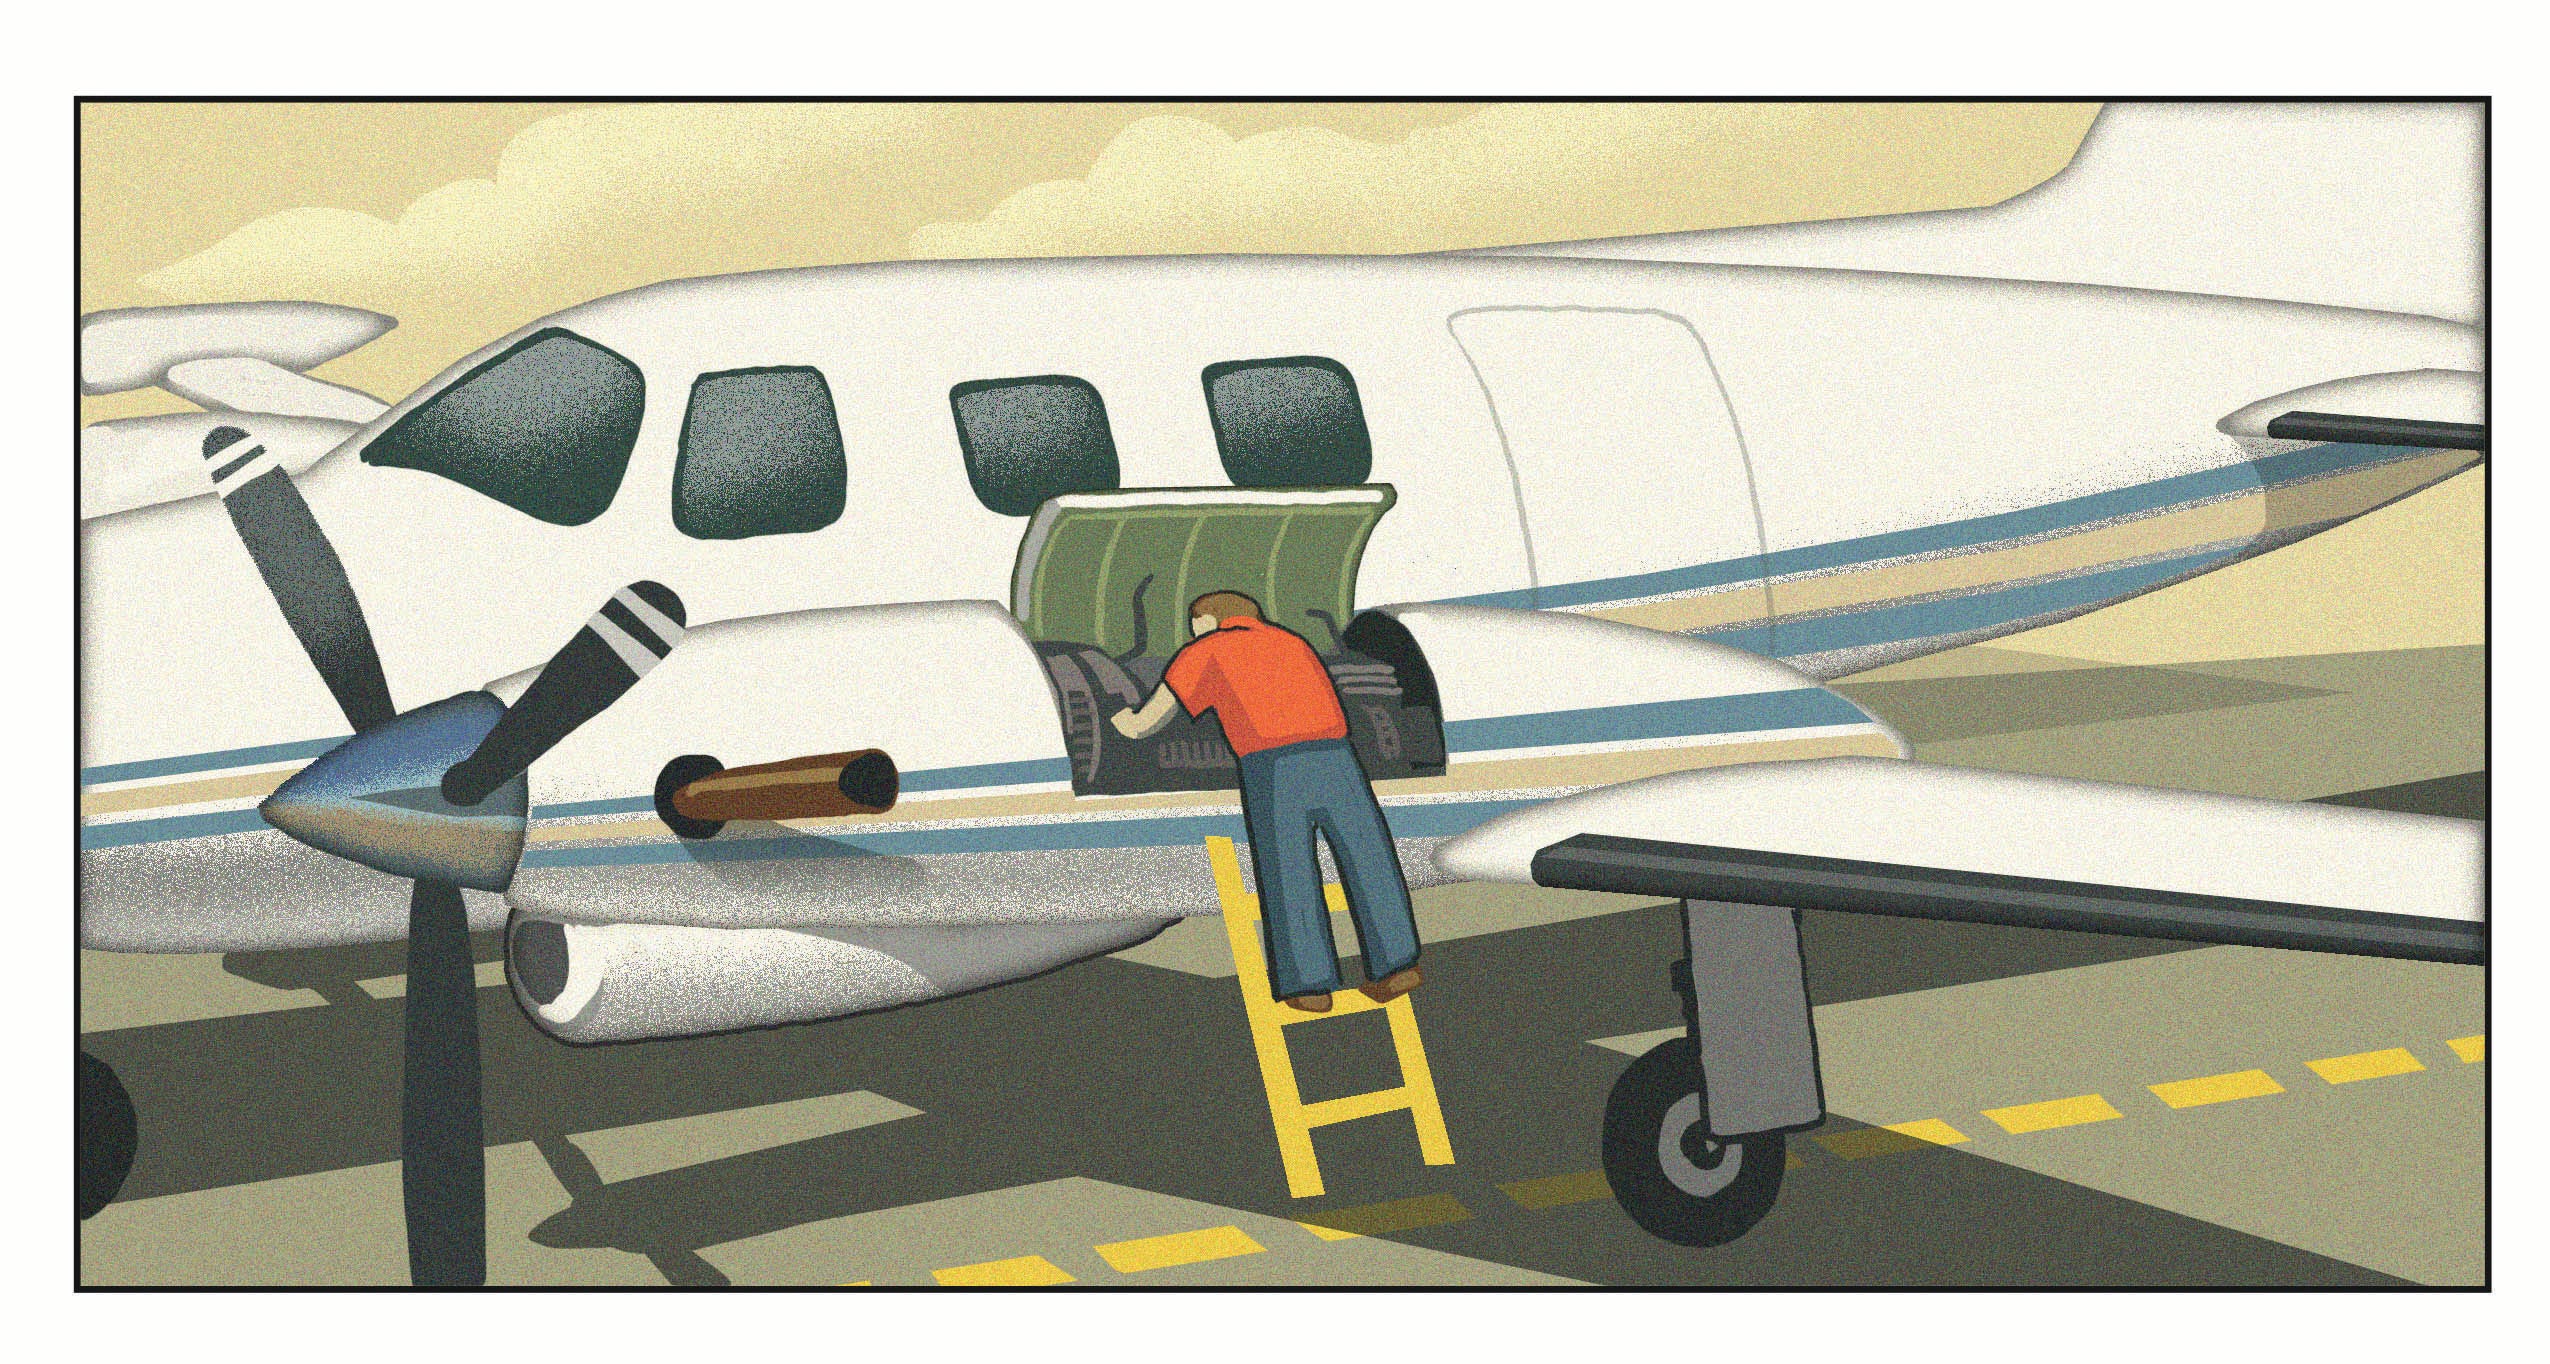 Gear Up: The Art and Cost of Airplane Maintenance